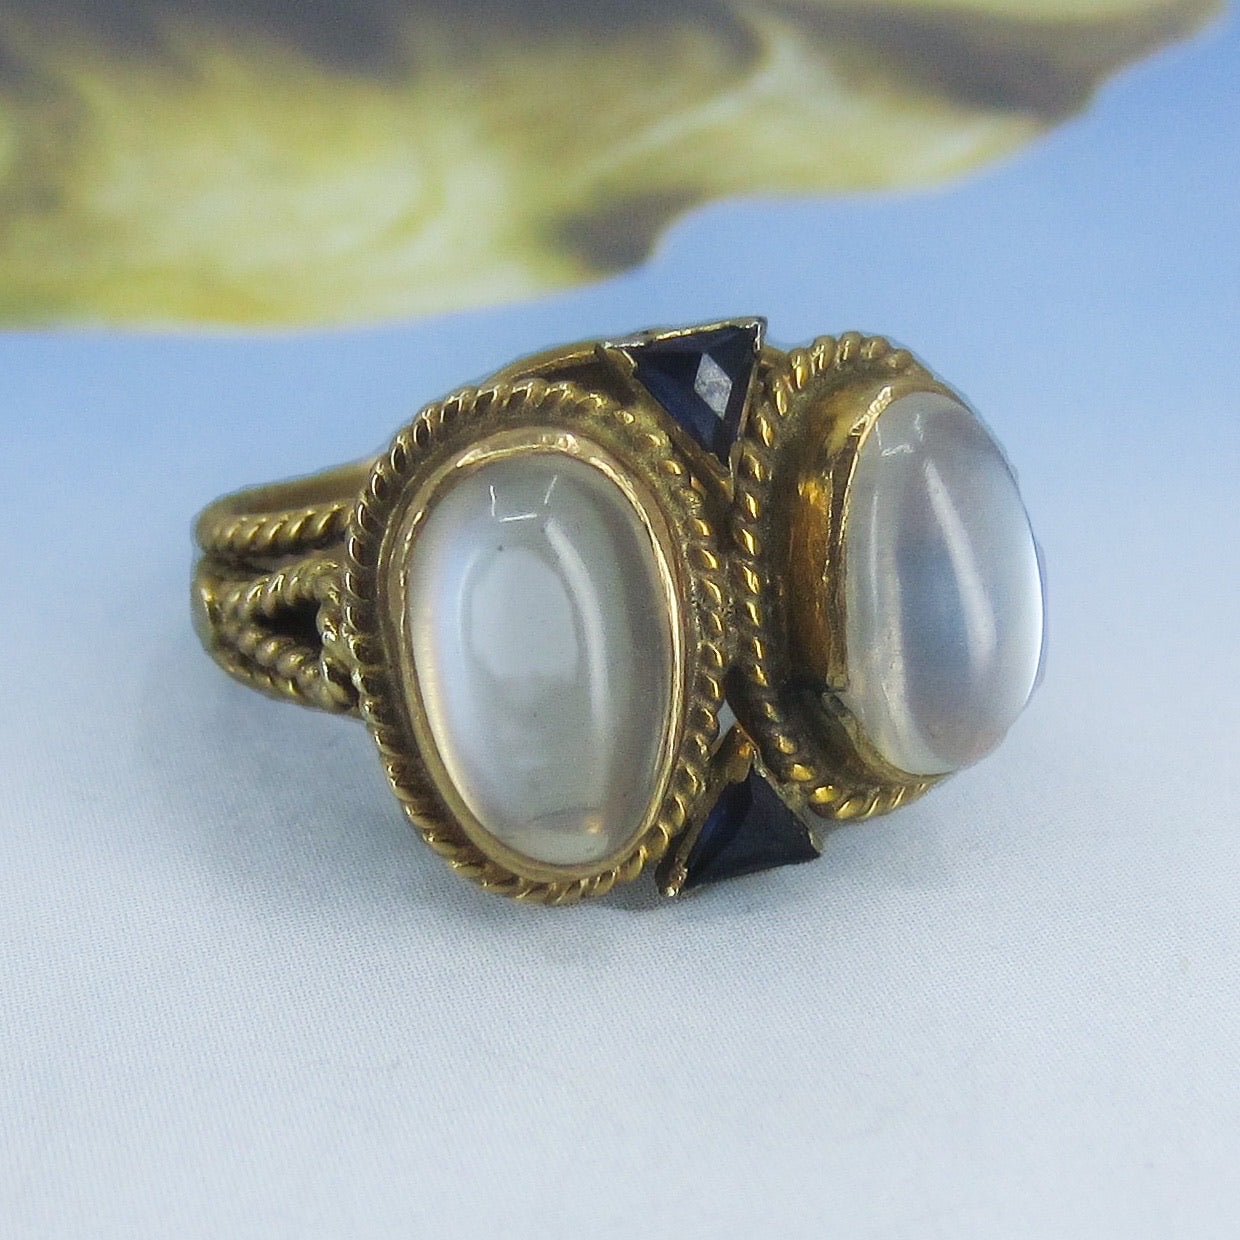 SOLD—MidCentury Moonstone and Sapphire Cocktail Ring 14k c. 1960